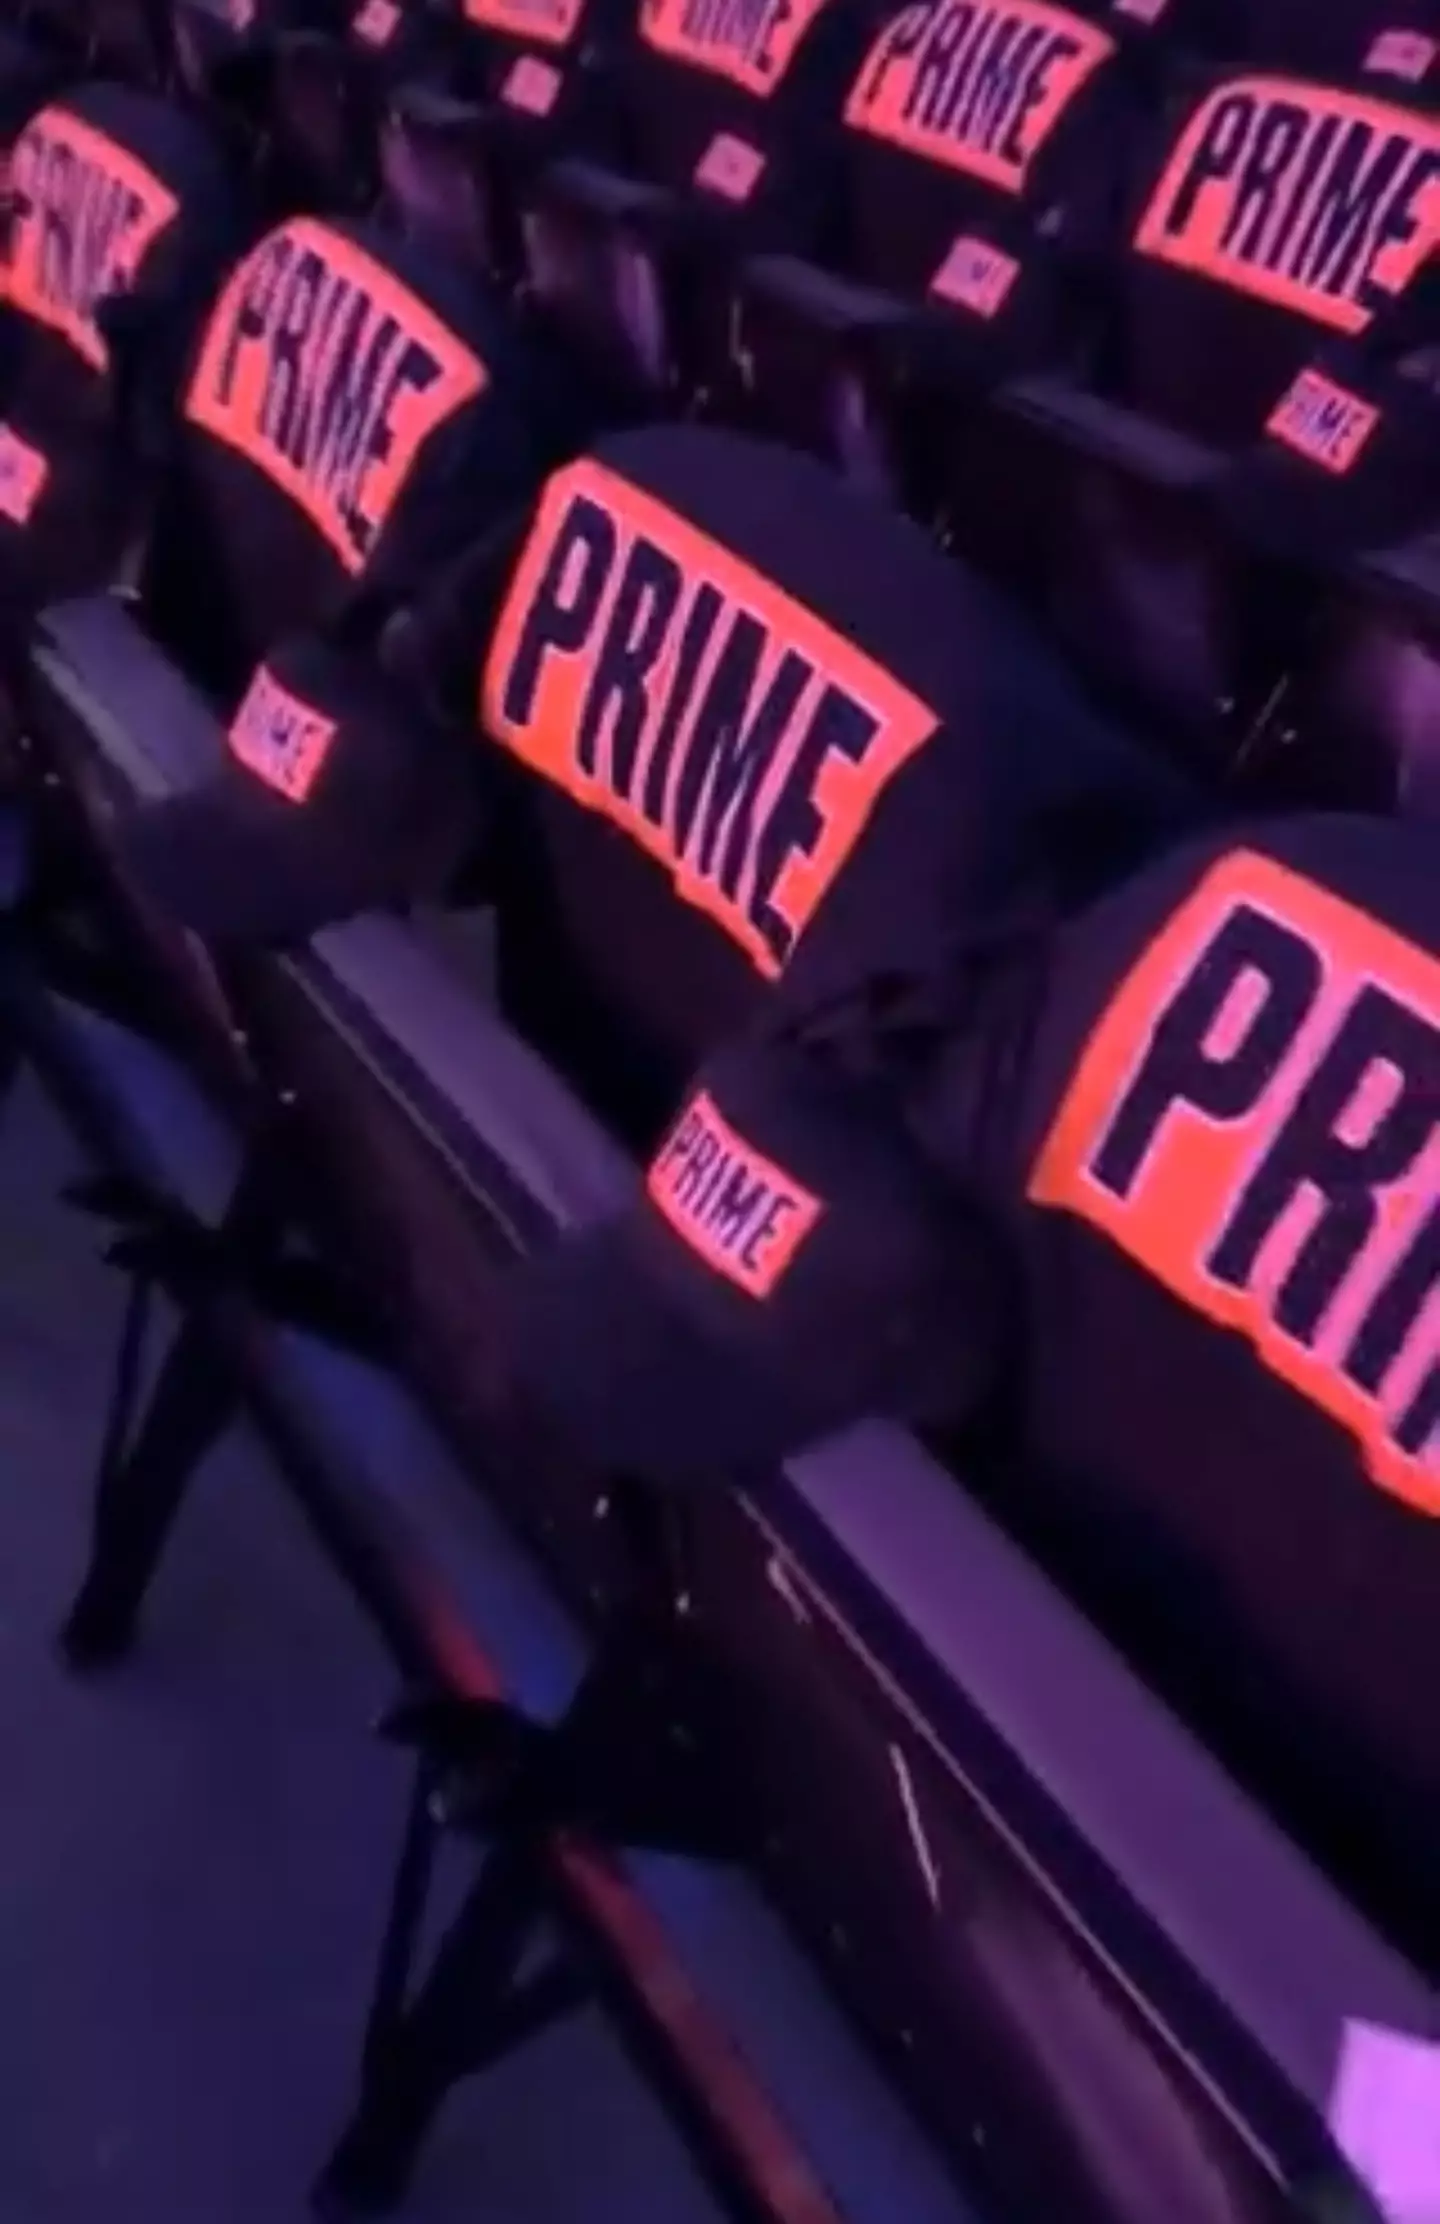 Everyone in attendance of the fight received exclusive Prime merchandise.